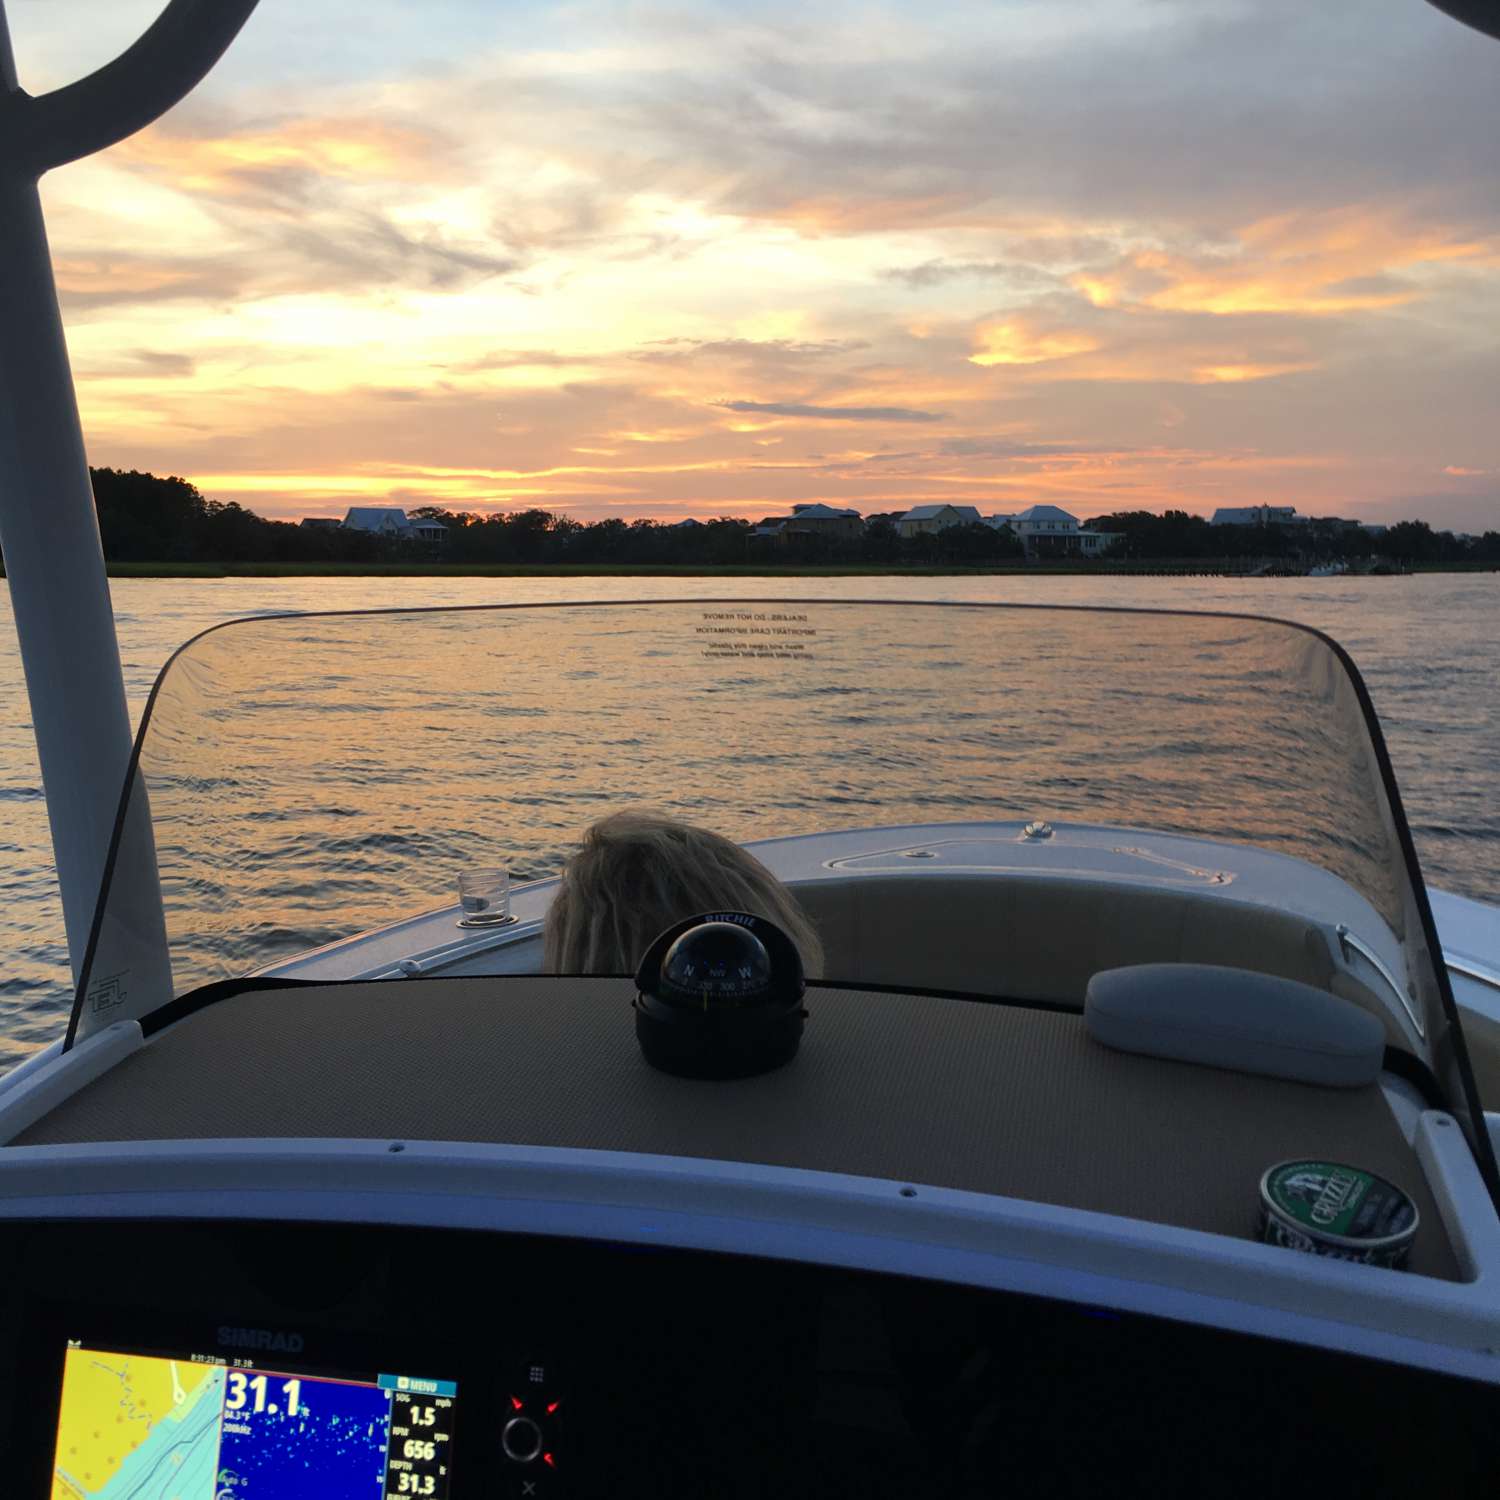 Watching the sunset in our new Sportsman boat. Watched the fireworks from the boat. Wando River...